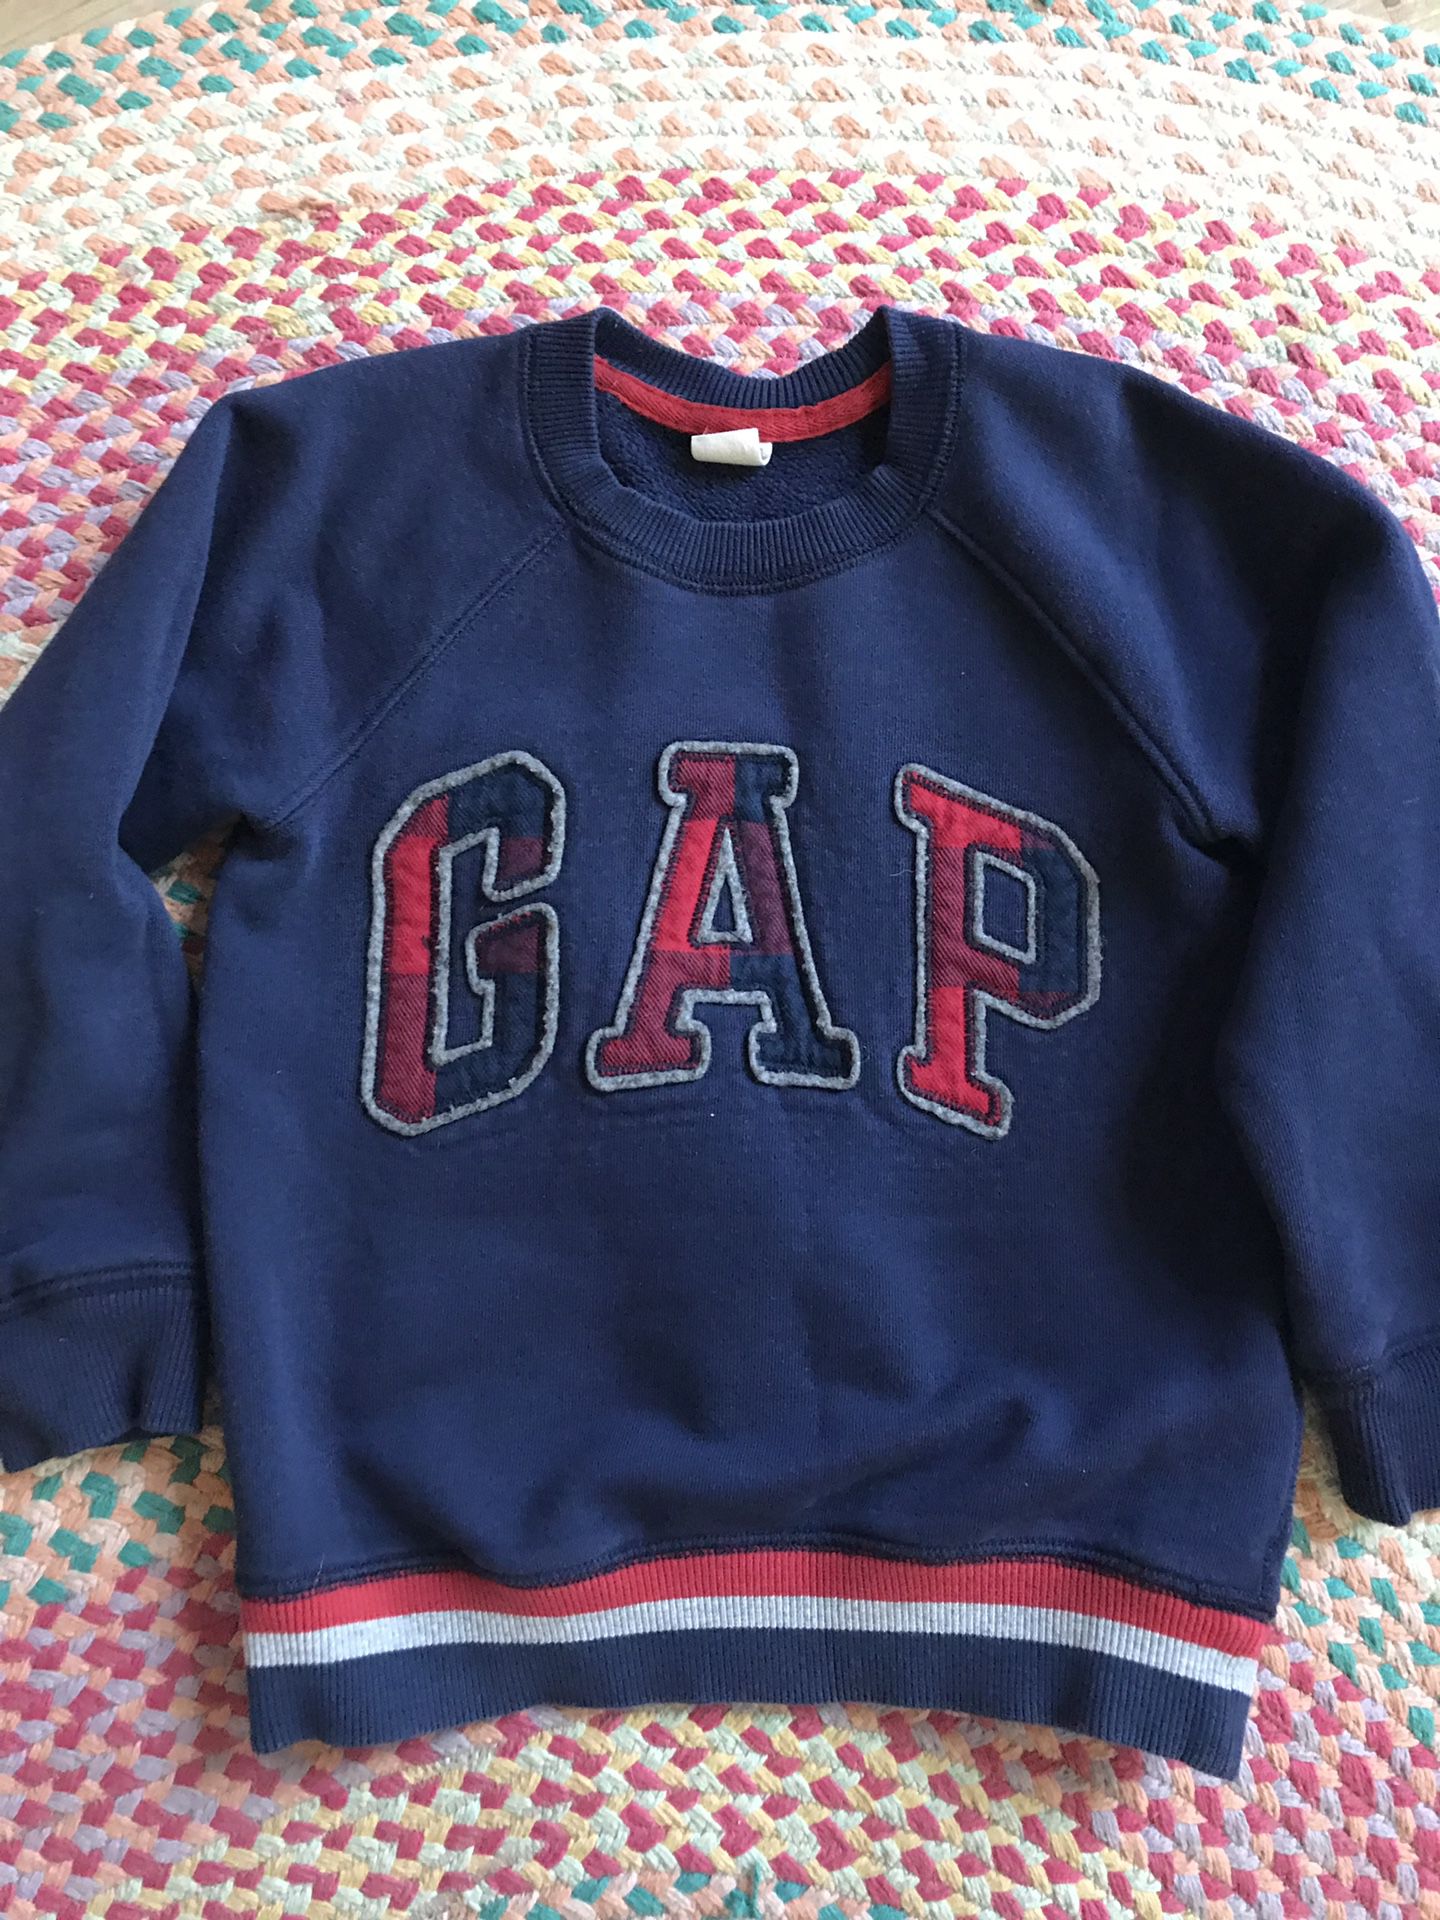 Boys 5t Gap and Old Navy clothes!